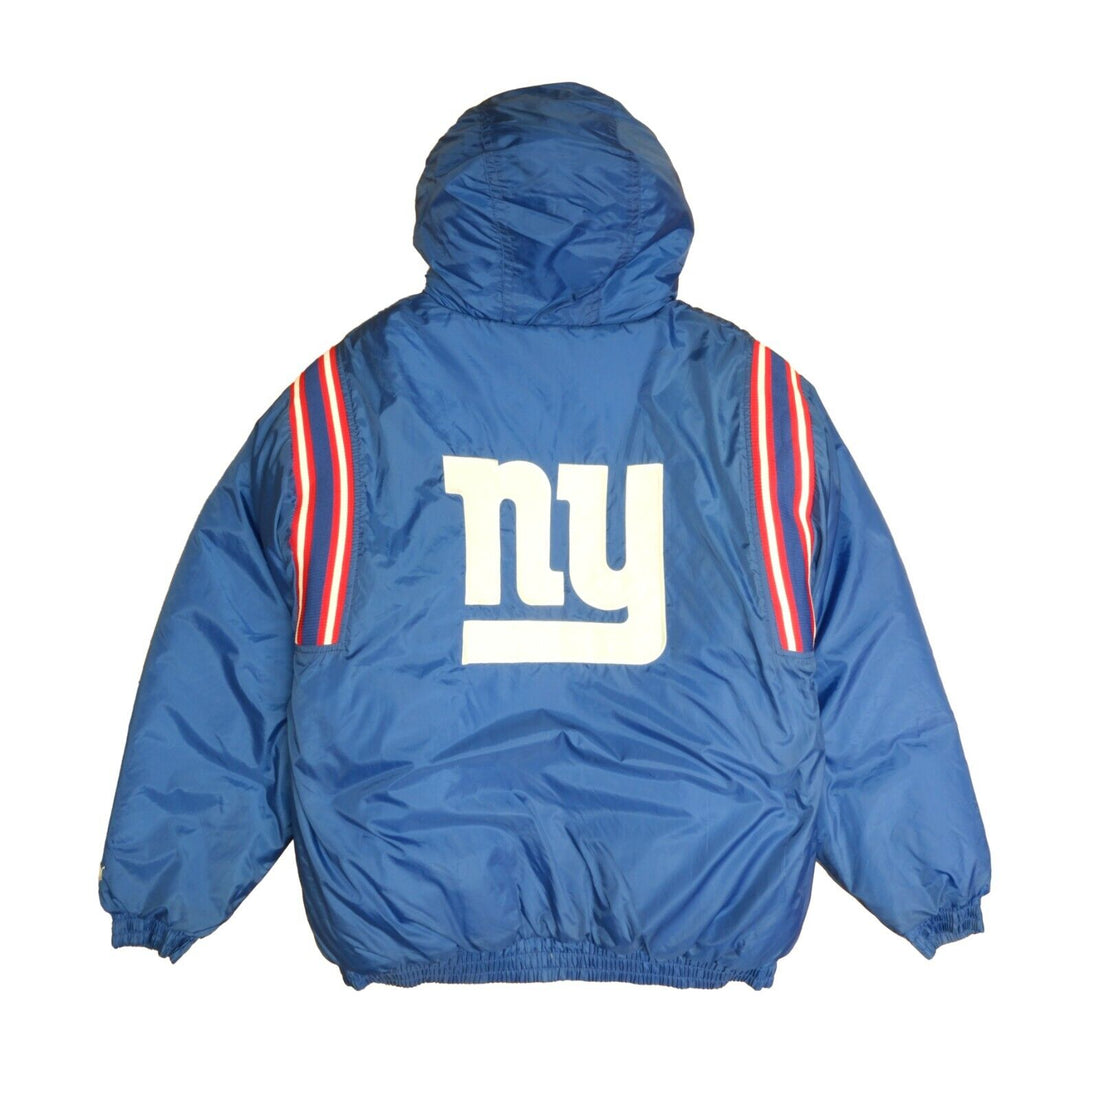 Vintage New York Giants Puma Puffer Jacket Size Large Insulated NFL